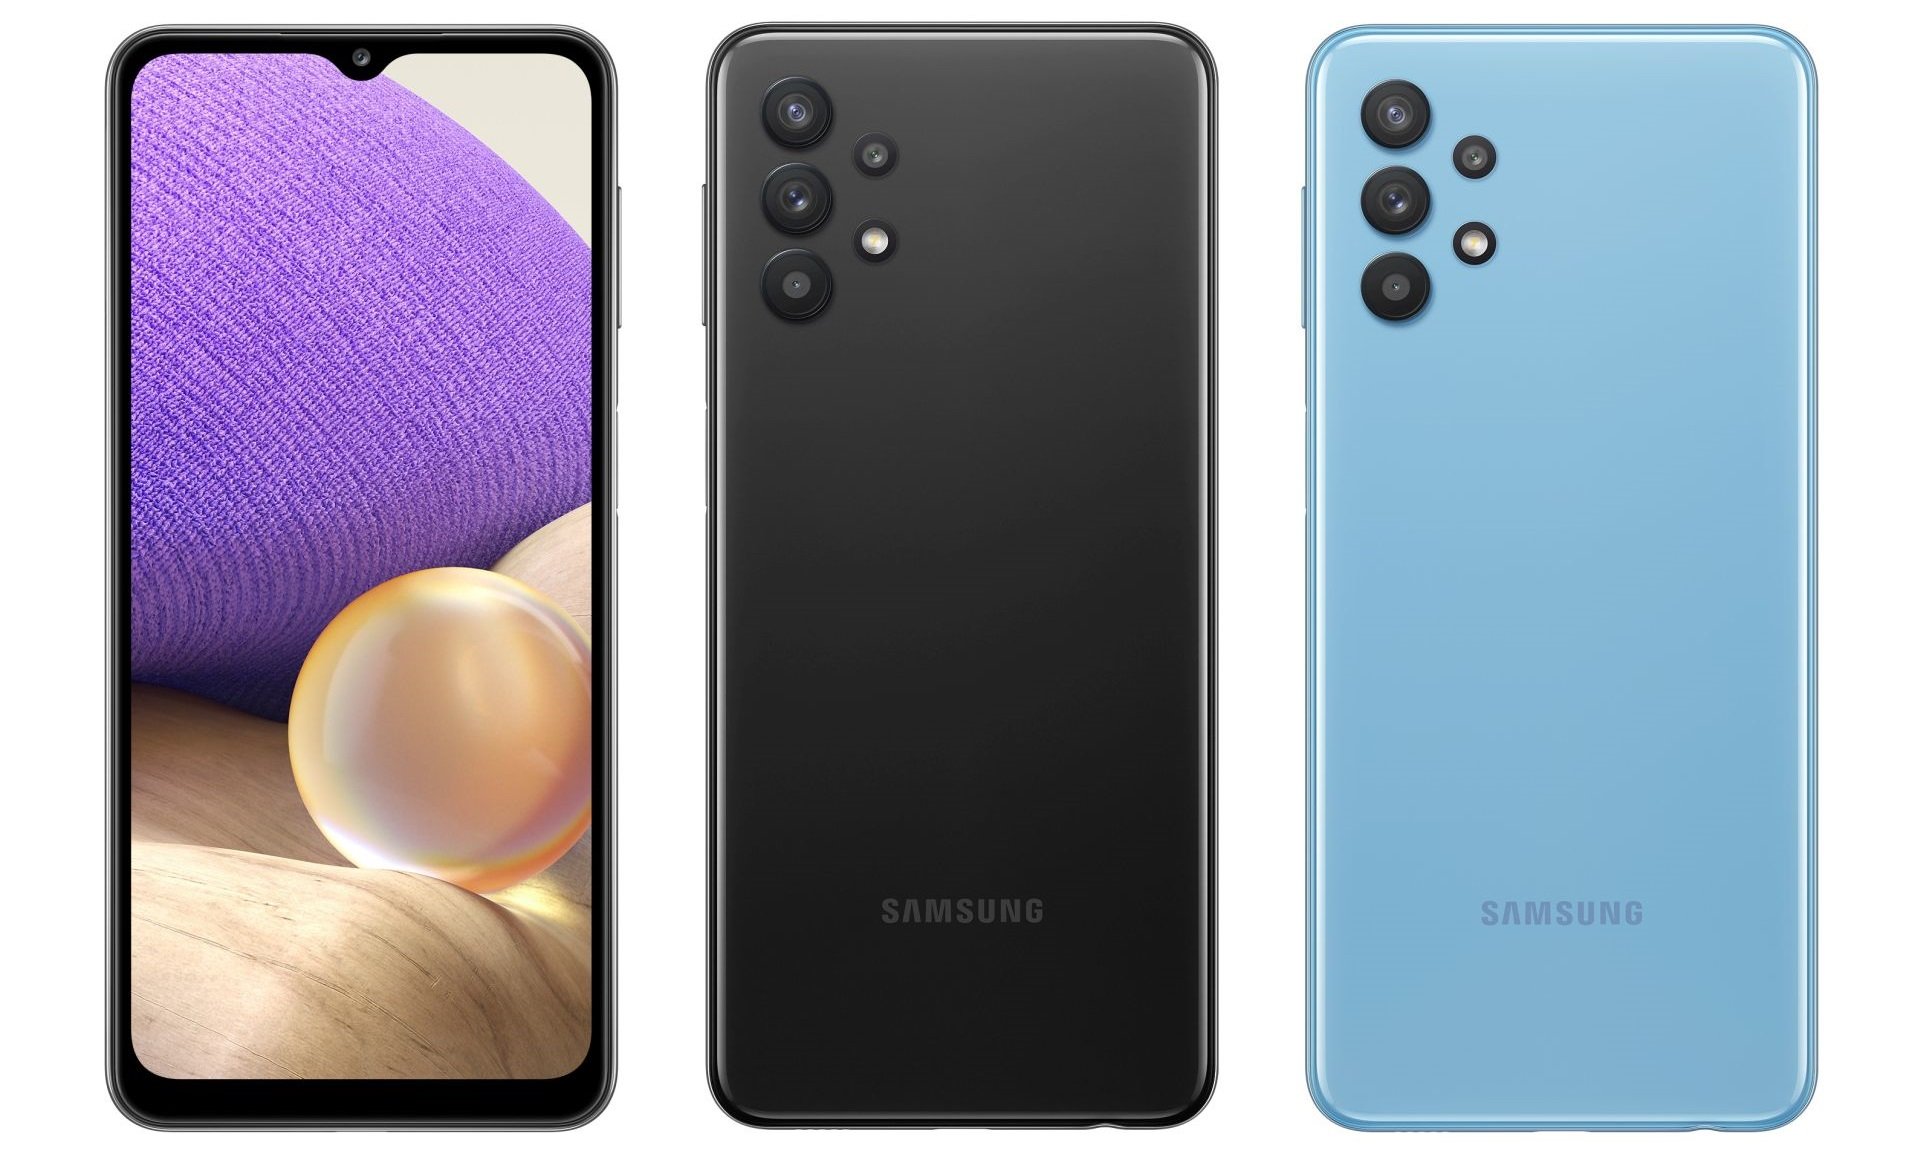 Samsung's cheapest 5G phone of 2021, the Galaxy A32 5G, is official